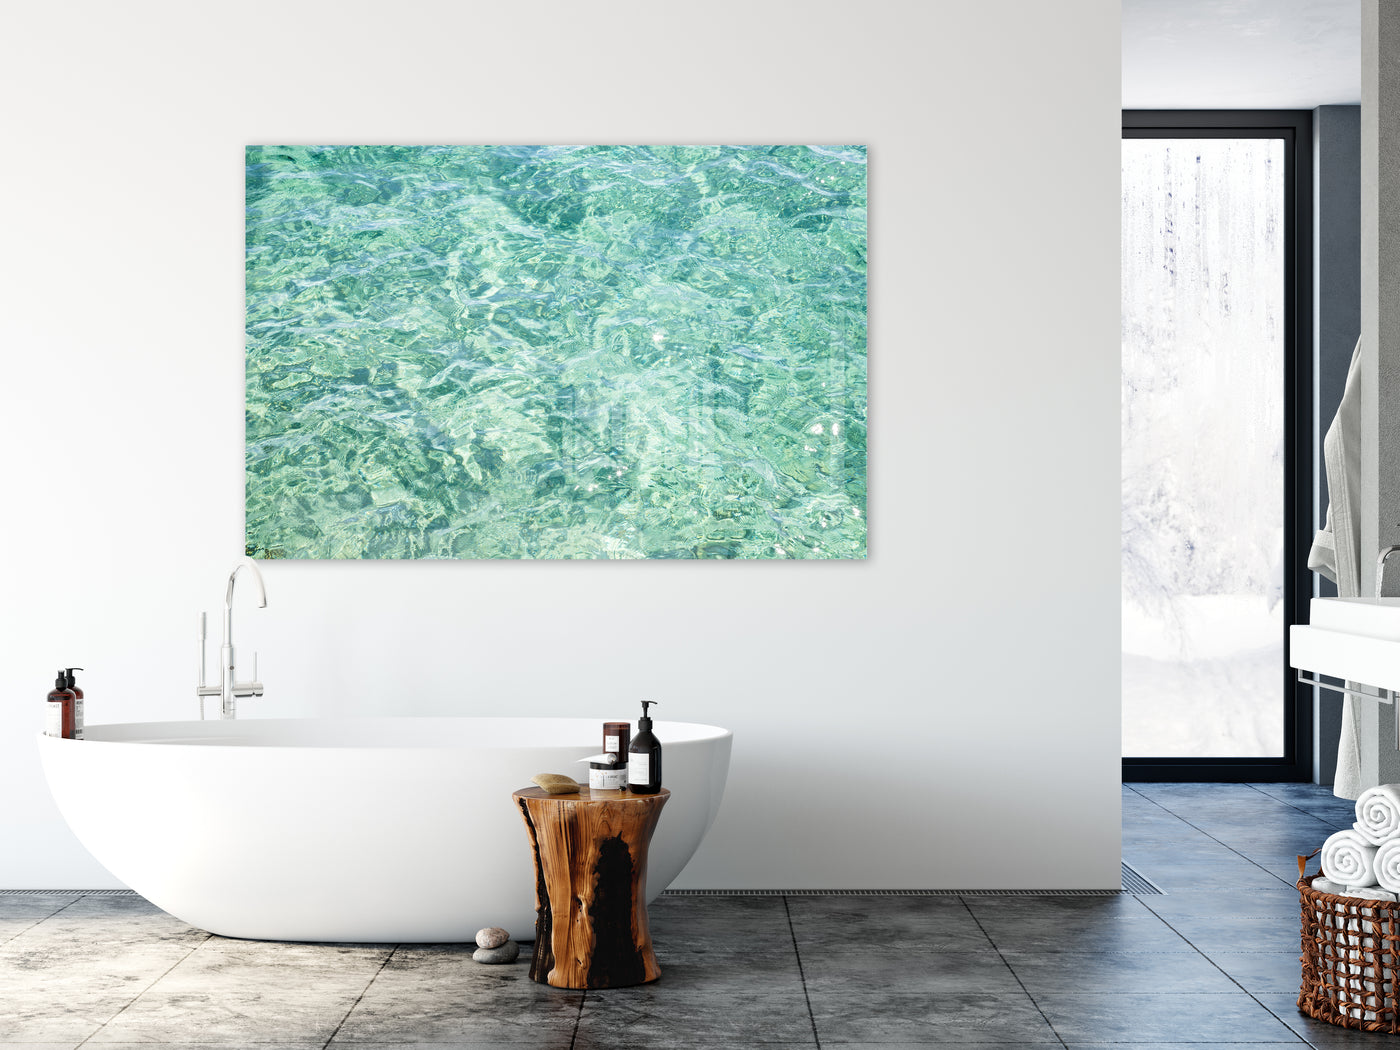 Abstract Water - Oversized acrylic glass print by Cattie Coyle Photography in bathroom